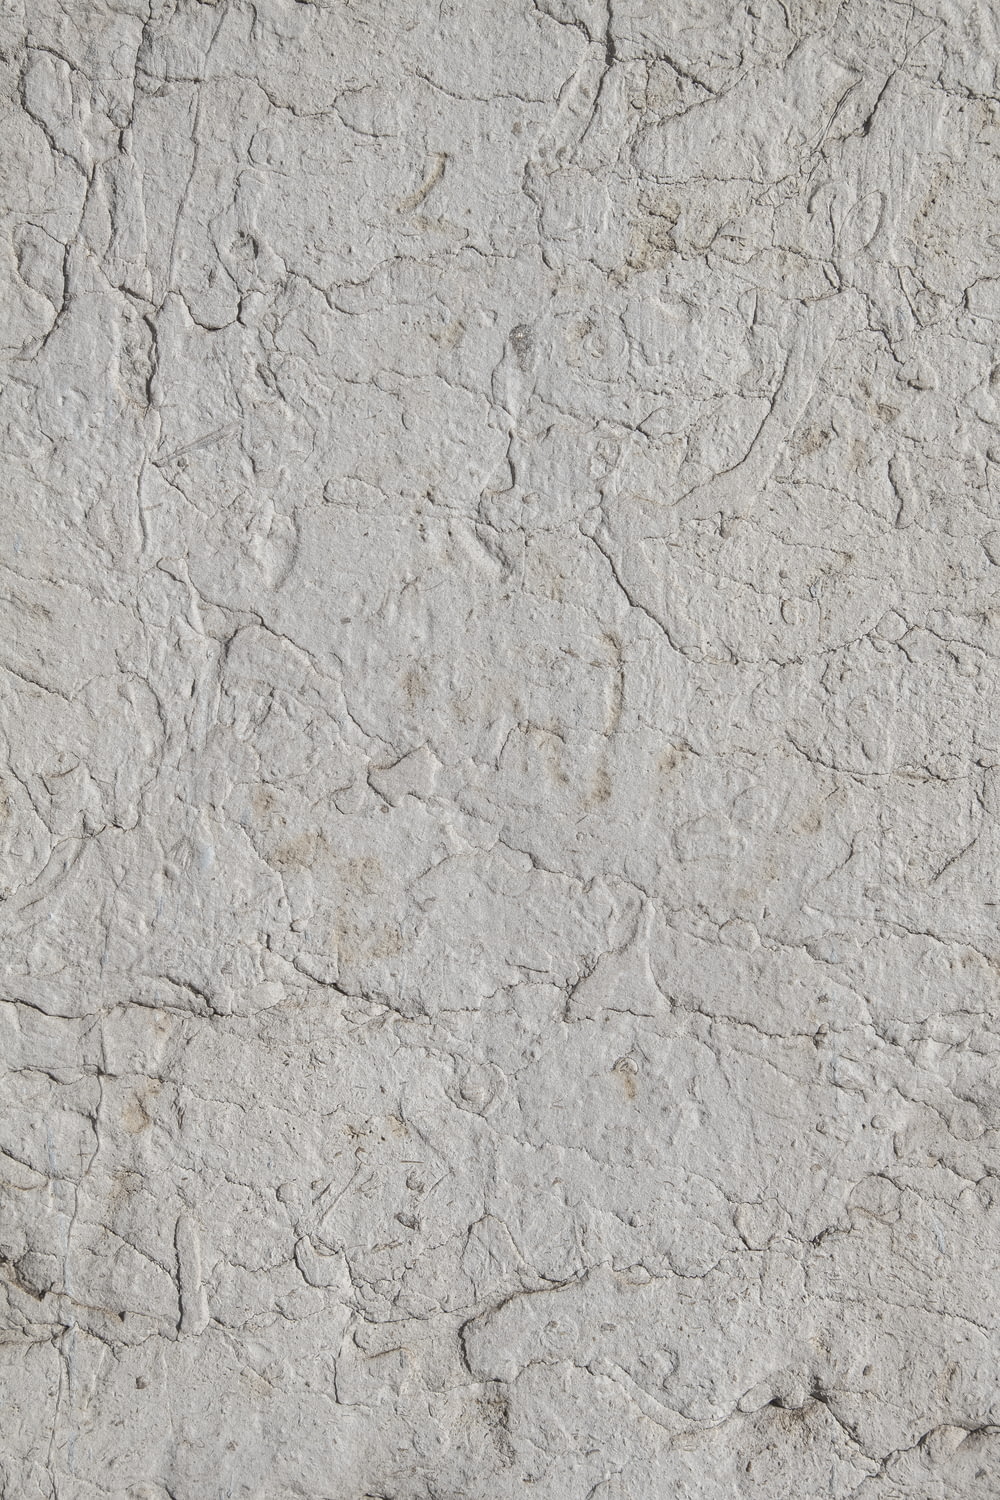 white and brown concrete wall